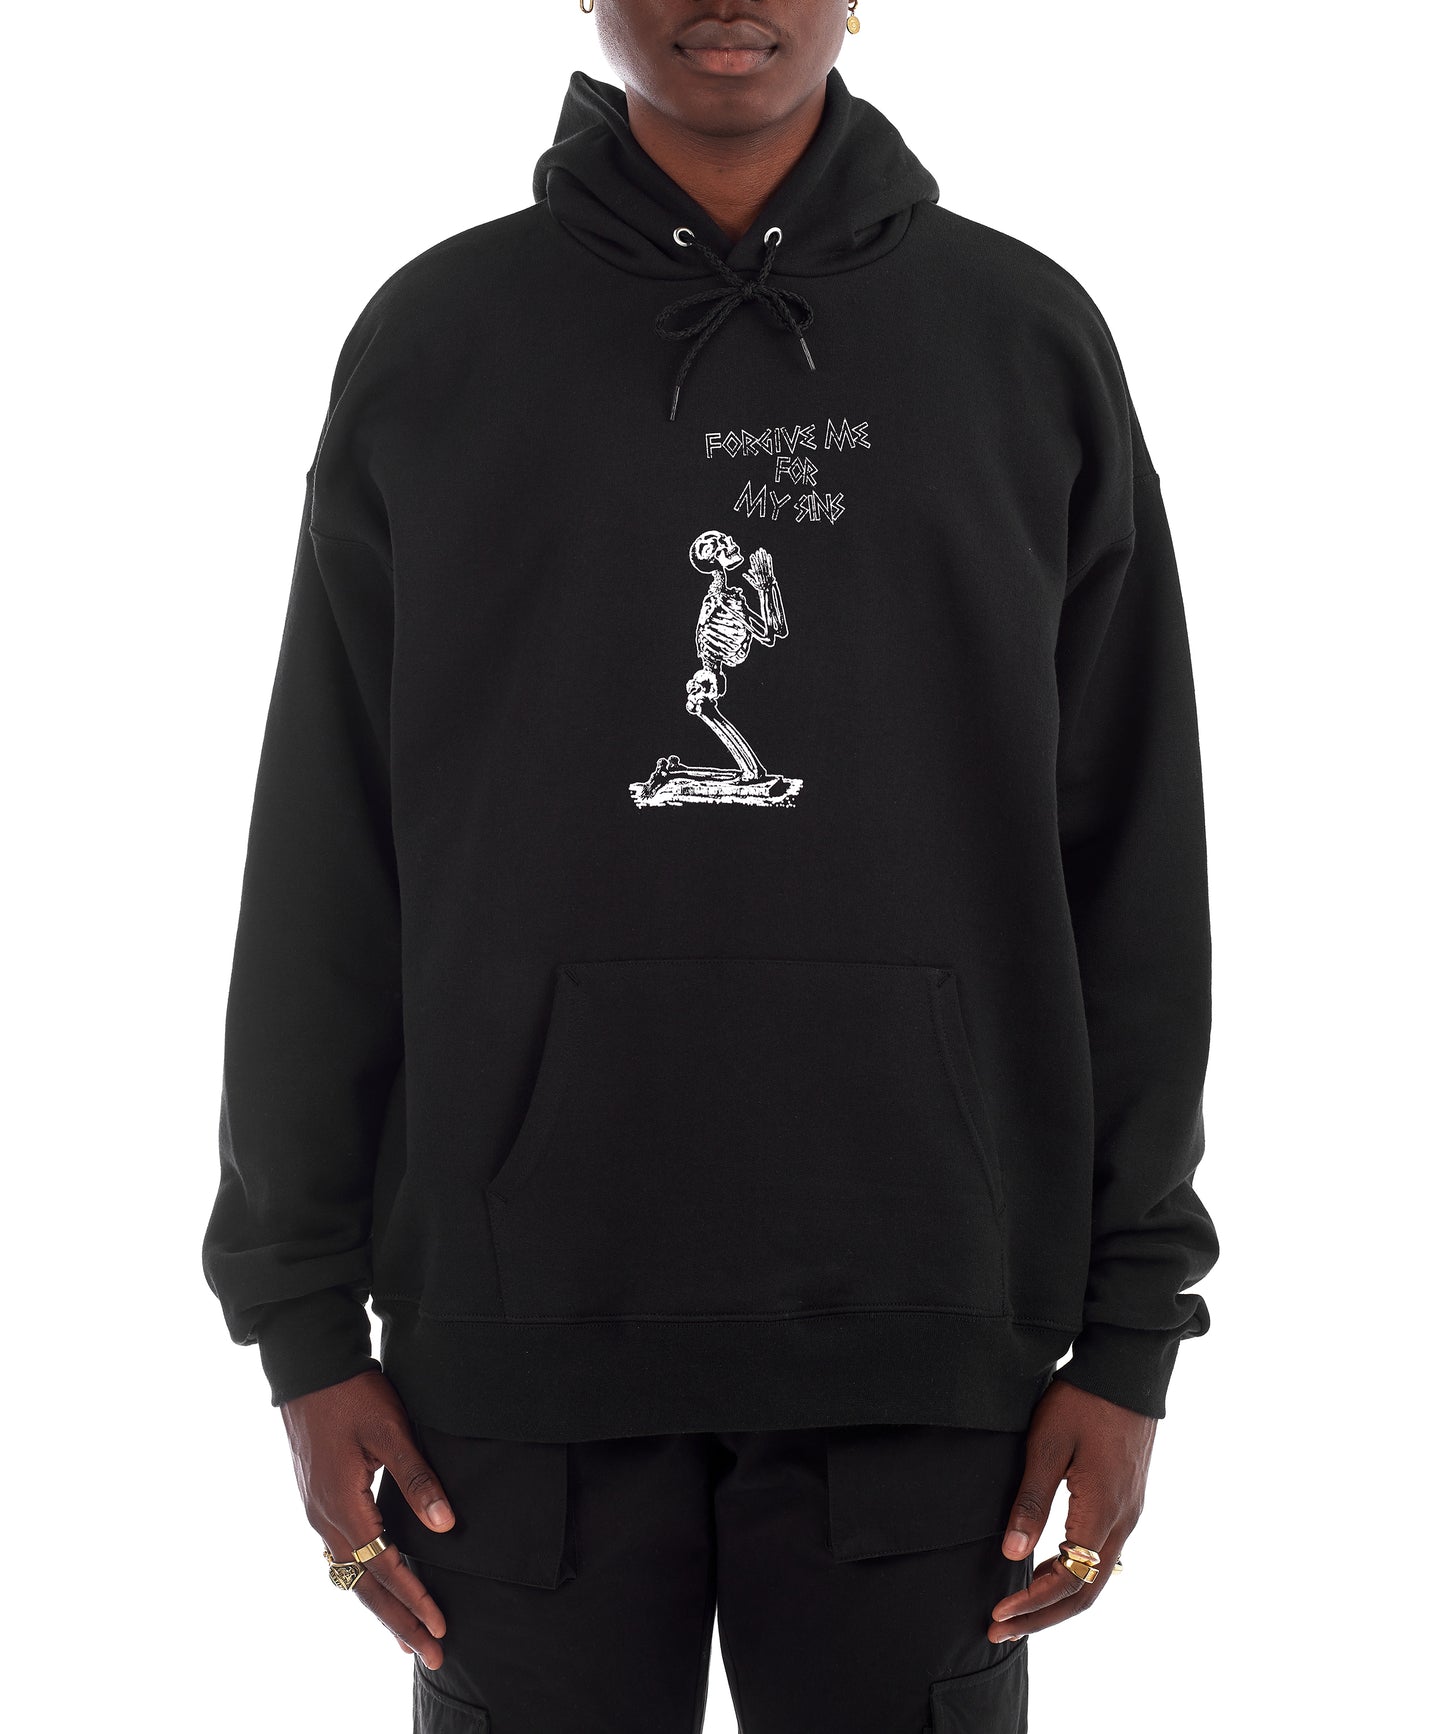 Forgive Me For My Sins Hoodie